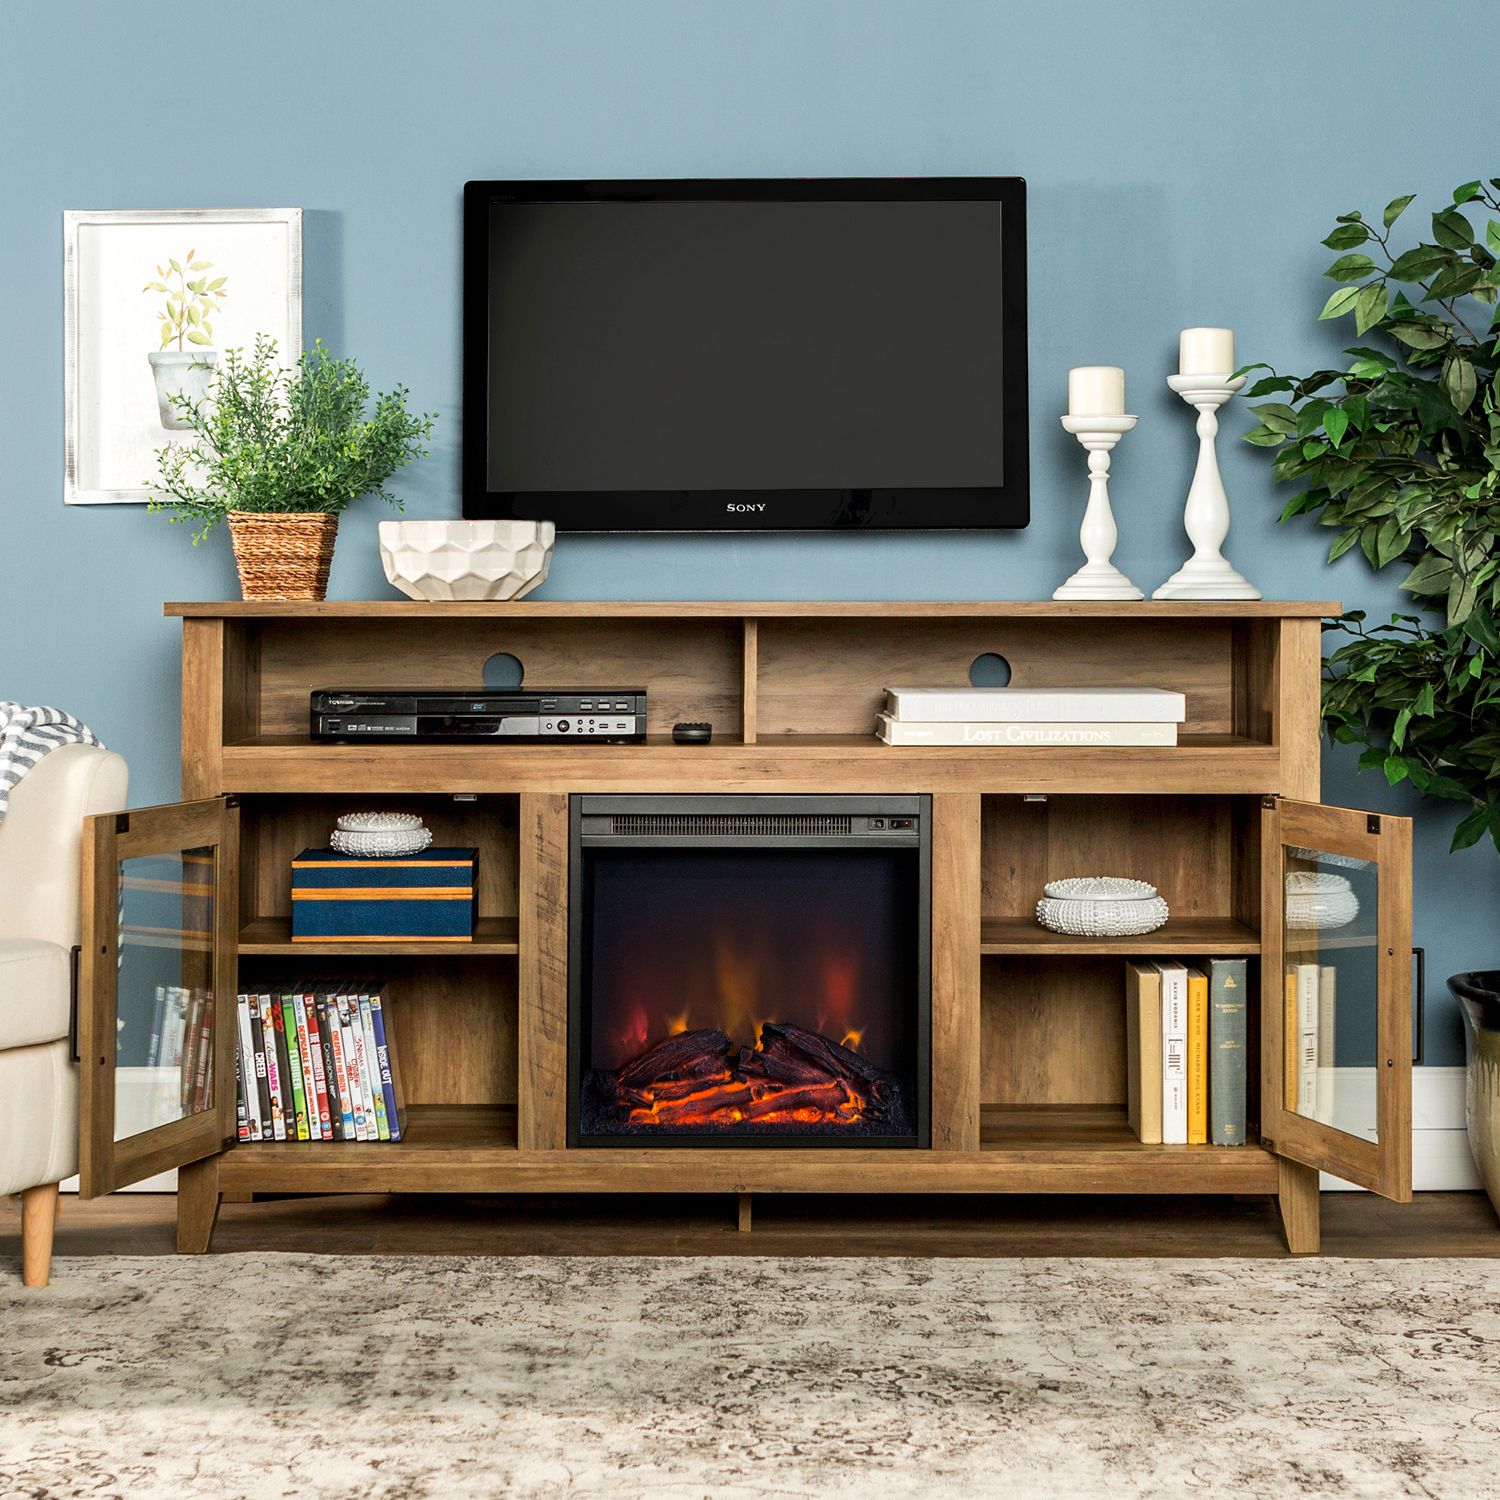 Highboy Wood Fireplace Tv Stand – Pier1 Intended For Wood Highboy Fireplace Tv Stands (View 3 of 20)